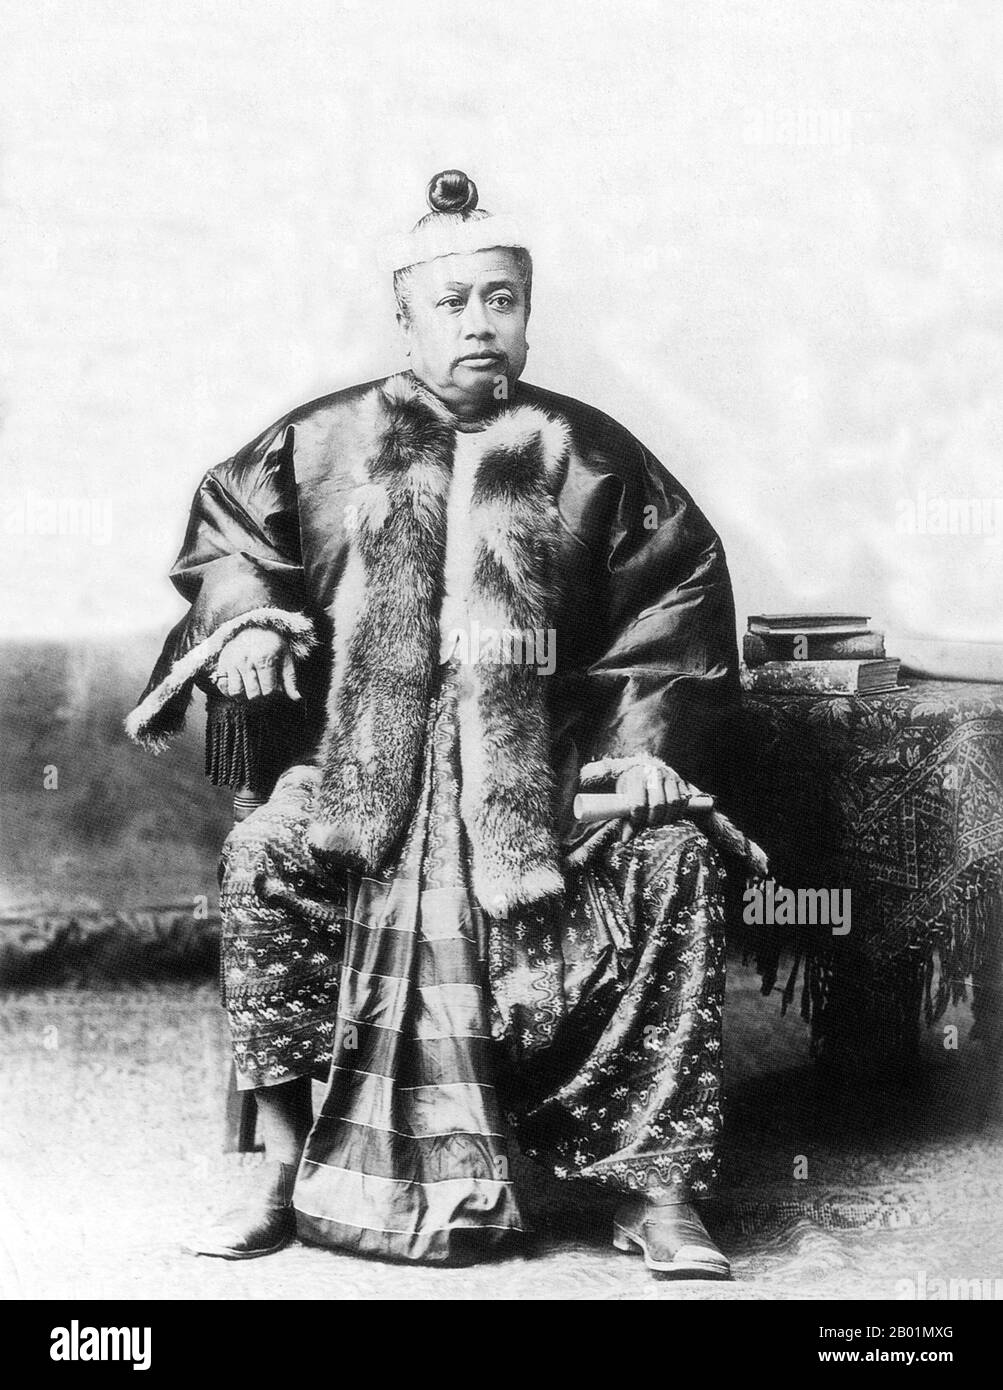 Burma/Myanmar: A Bamar official dressed in silk 'pasoe' and fur jacket to indicate rank, late 19th century.  The British conquest of Burma began in 1824 in response to a Burmese attempt to invade India. By 1886, and after two further wars, Britain had incorporated the entire country into the British Raj. To stimulate trade and facilitate changes, the British brought in Indians and Chinese, who quickly displaced the Burmese in urban areas. To this day Rangoon and Mandalay have large ethnic Indian populations. Railways and schools were built, as well as a large number of prisons. Stock Photo